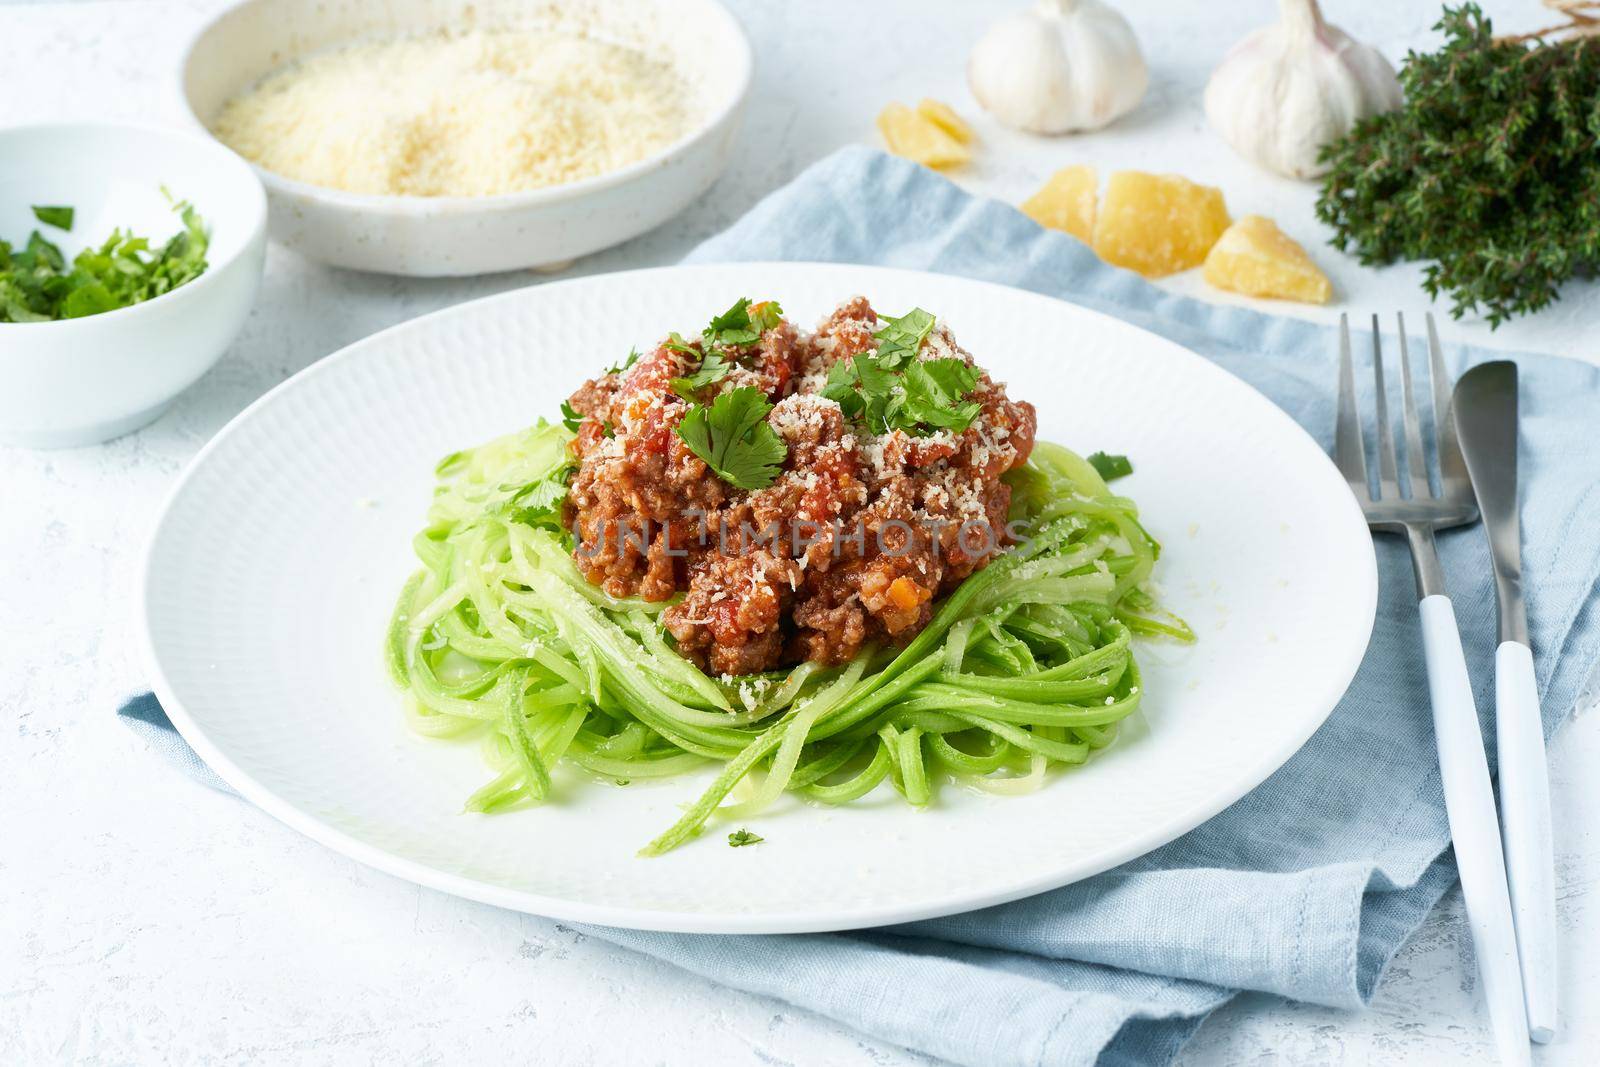 Keto pasta Bolognese with mincemeat and zucchini noodles, fodmap, lchf, low carb, ketogenic diet. Side view, close up. Clean eating, balanced food.